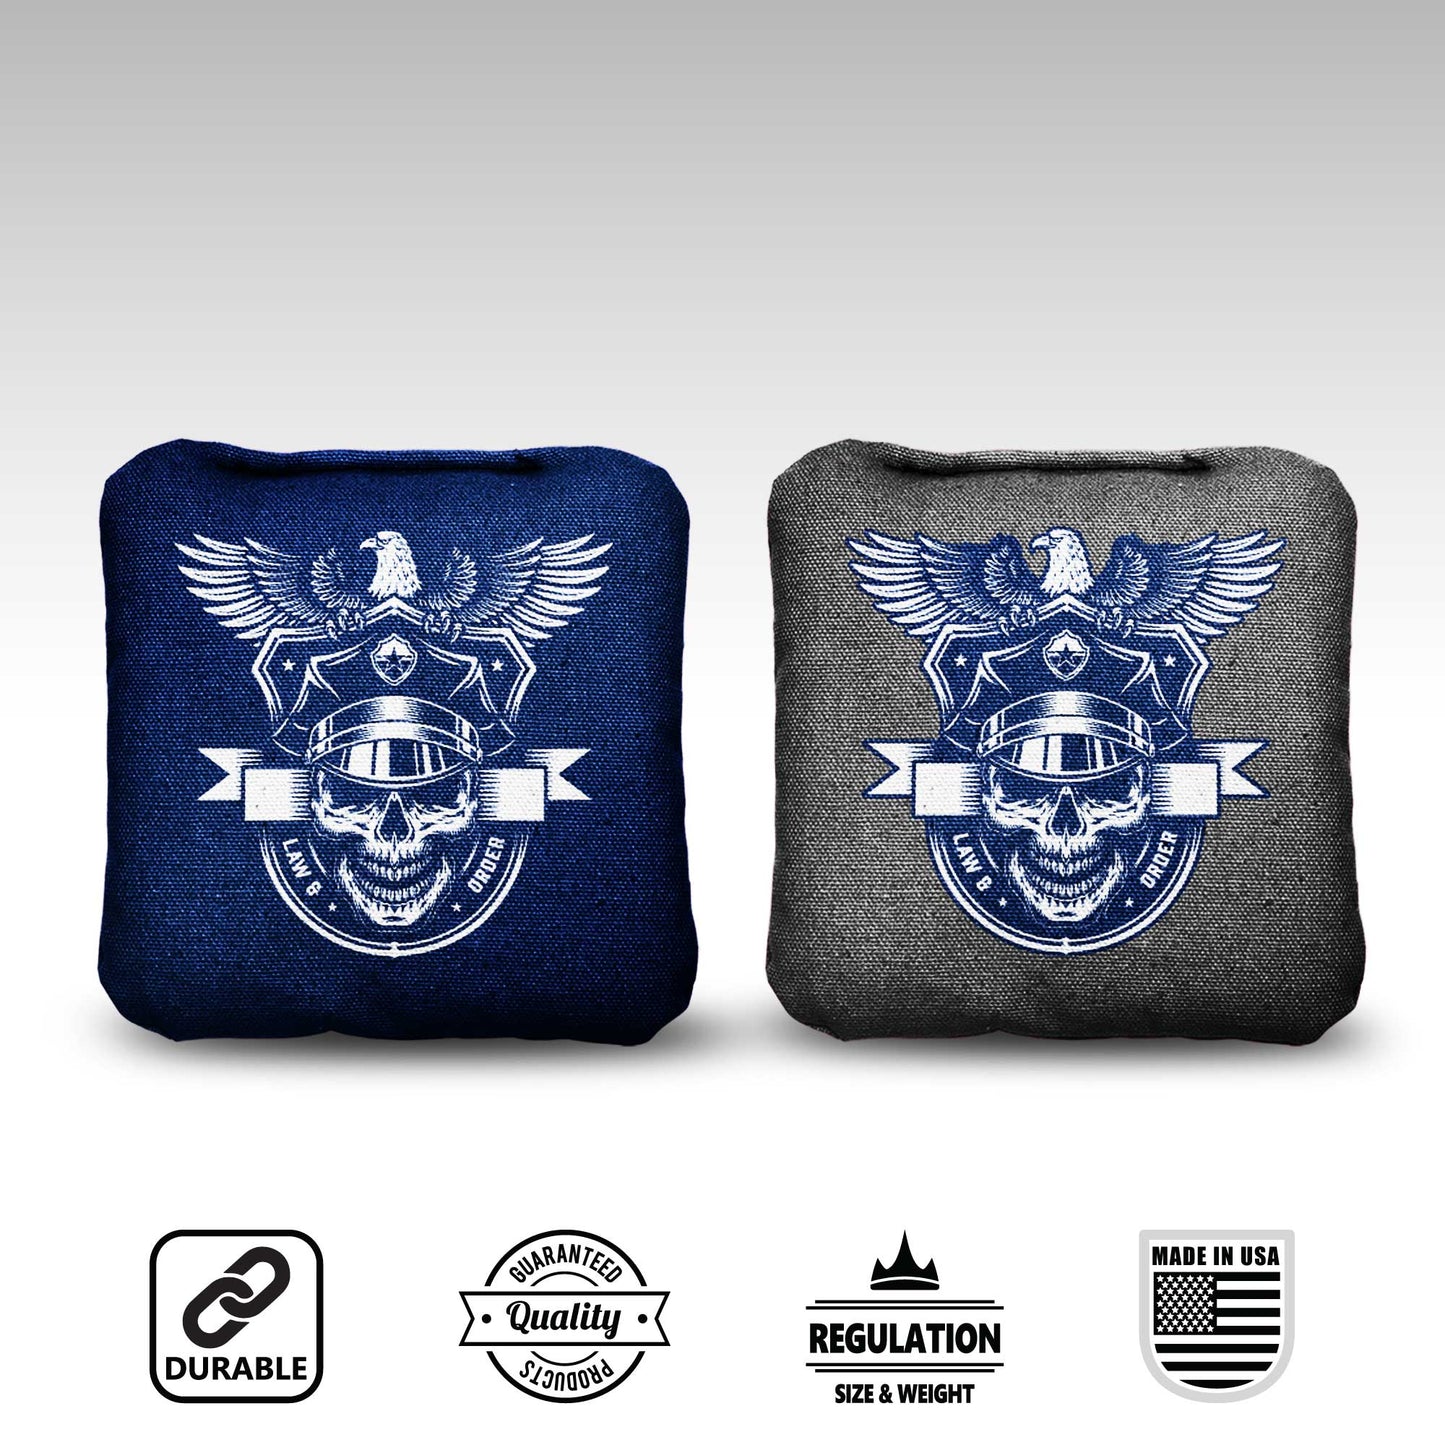 The Law & Orders - 8 Cornhole Bags